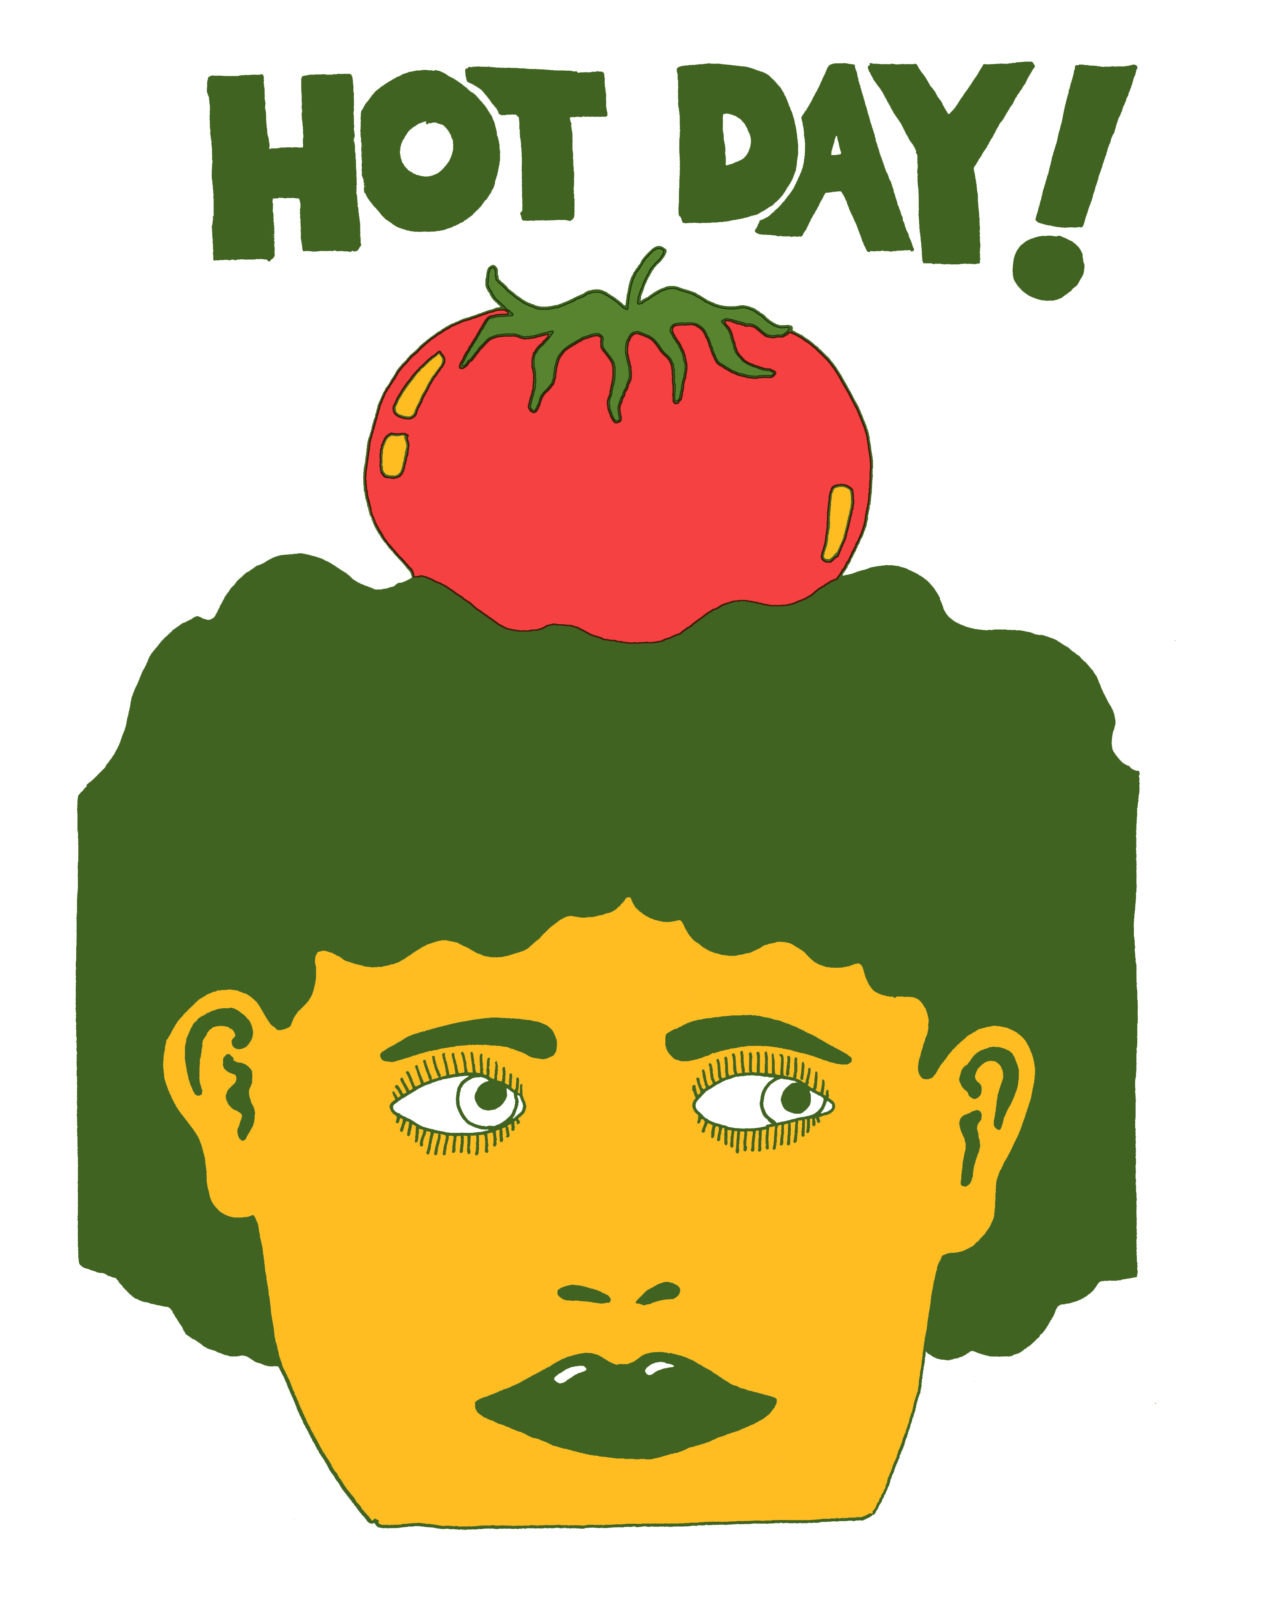 Hot days! , illustration by Clay Hickson, market theme